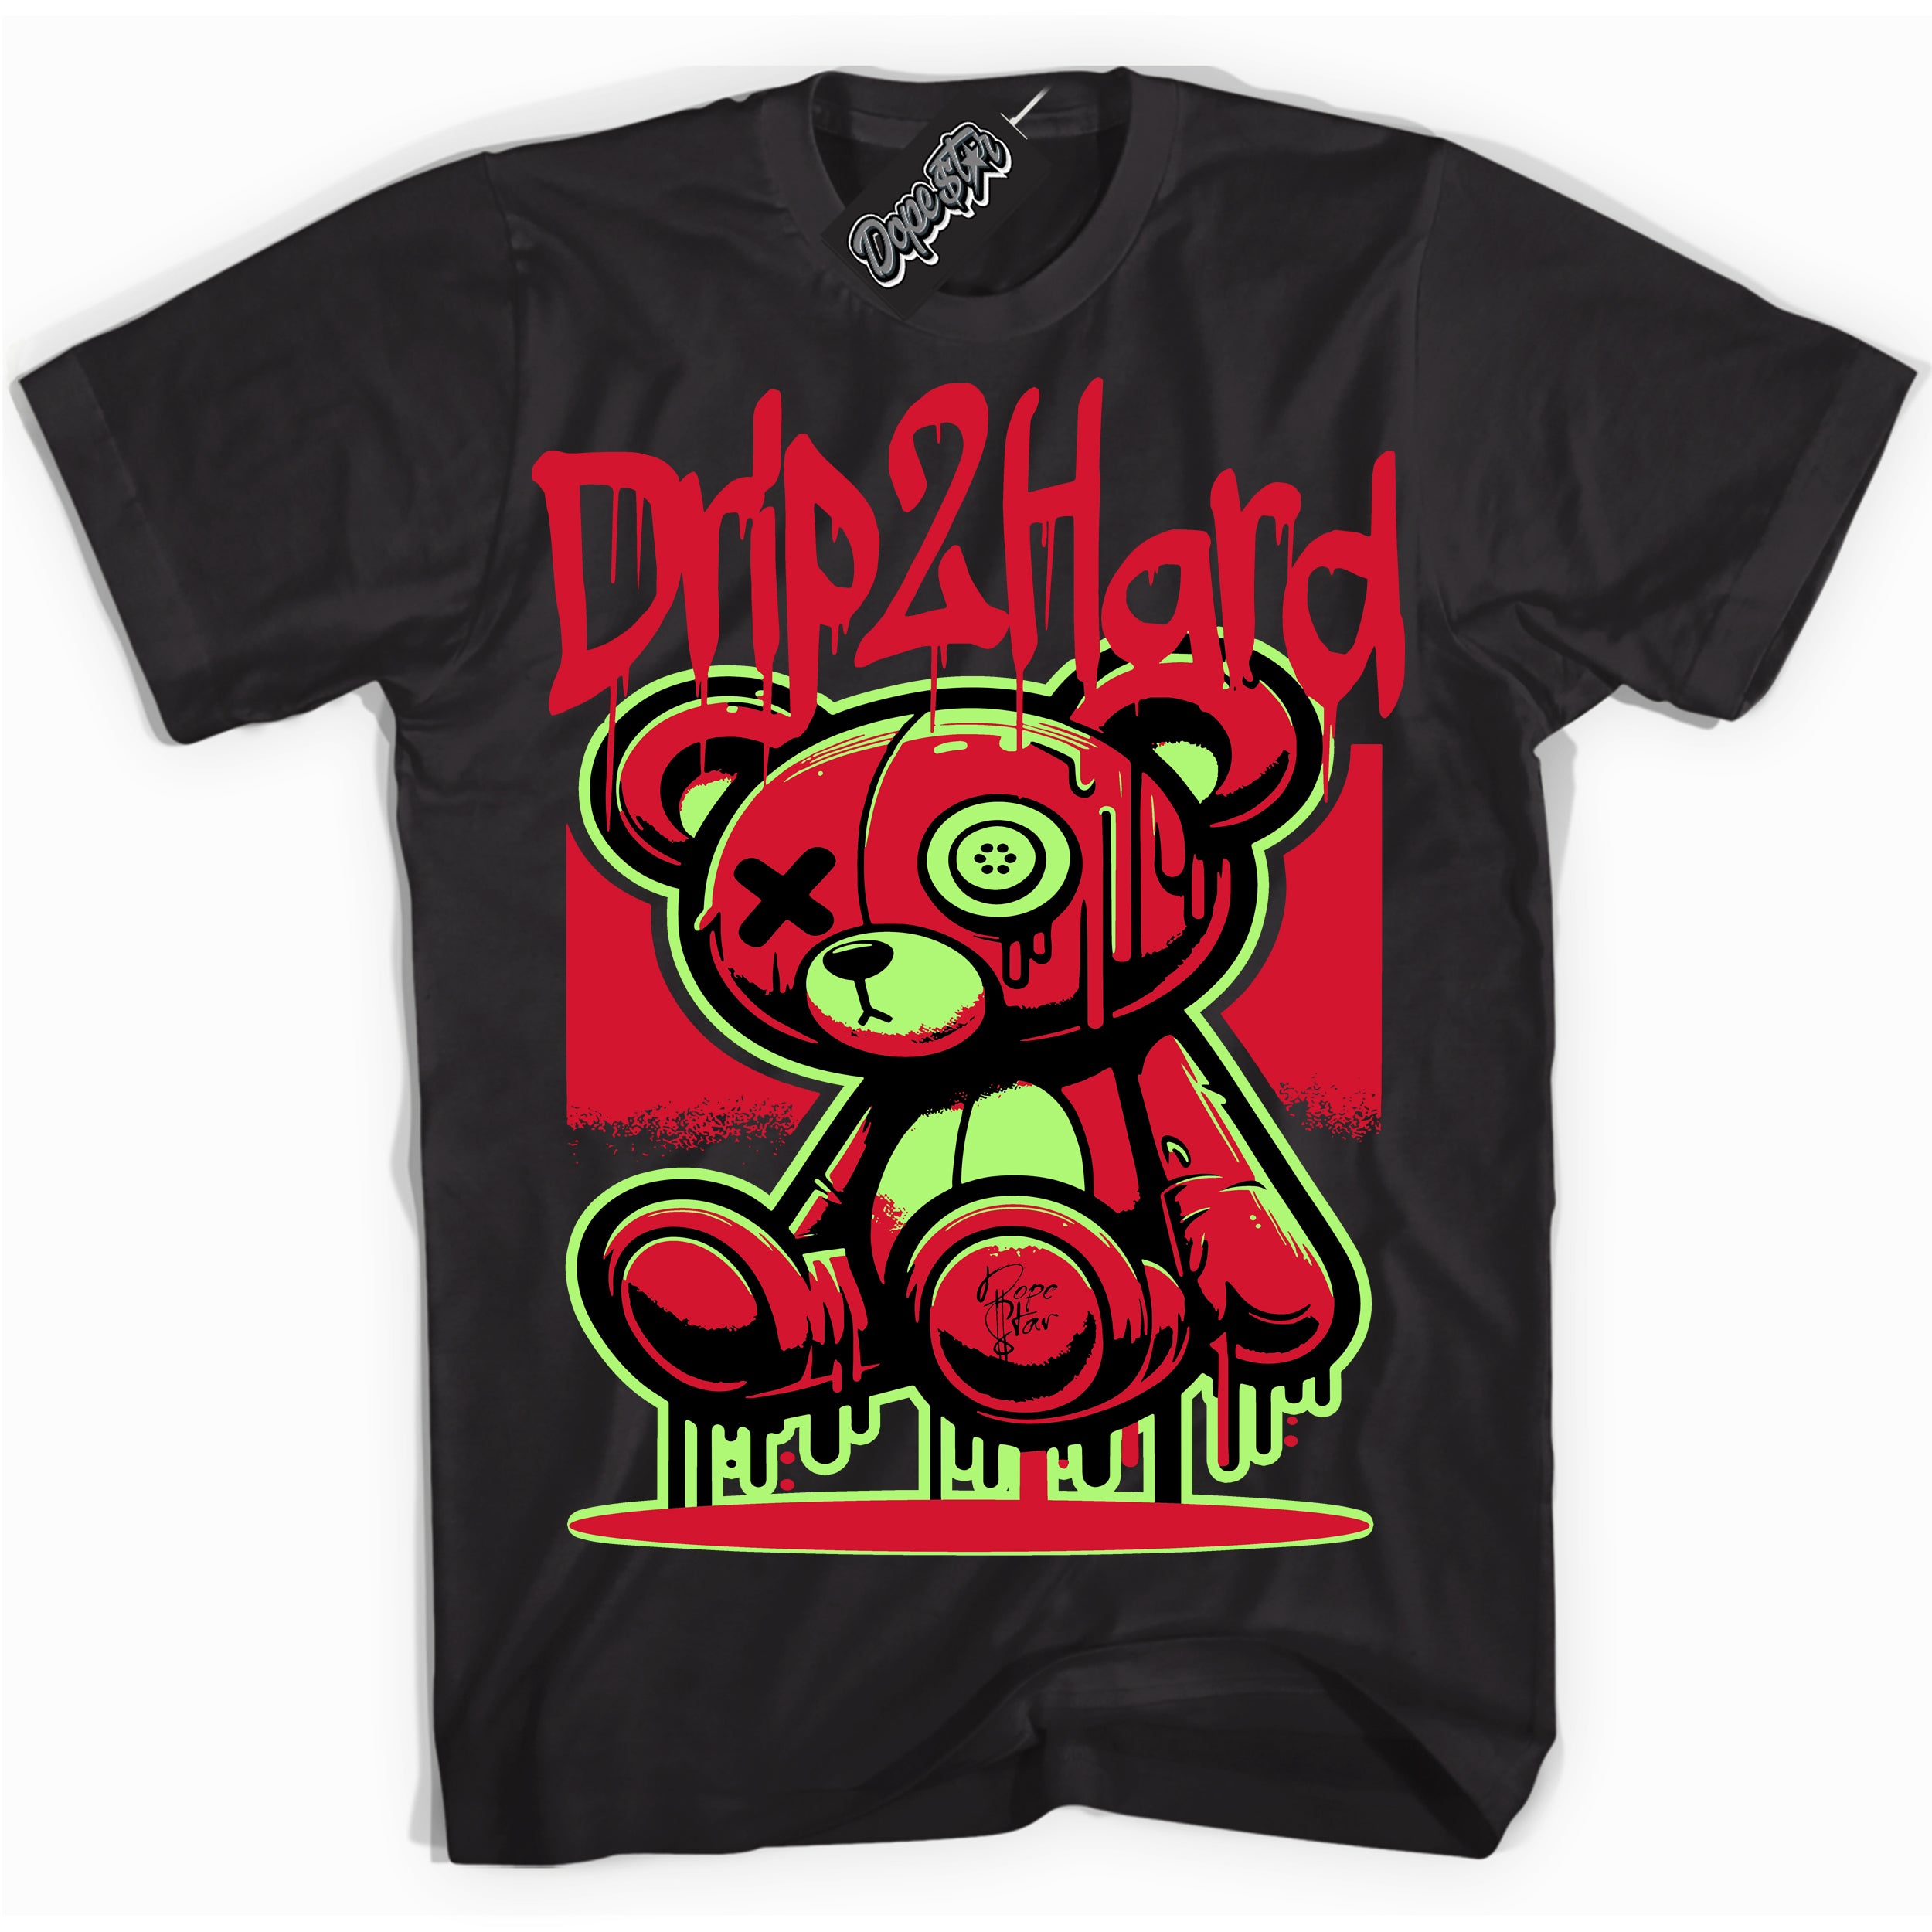 Cool Black graphic tee with “ Drip 2 Hard ” design, that perfectly matches Kobe 6 Reverse Grinch